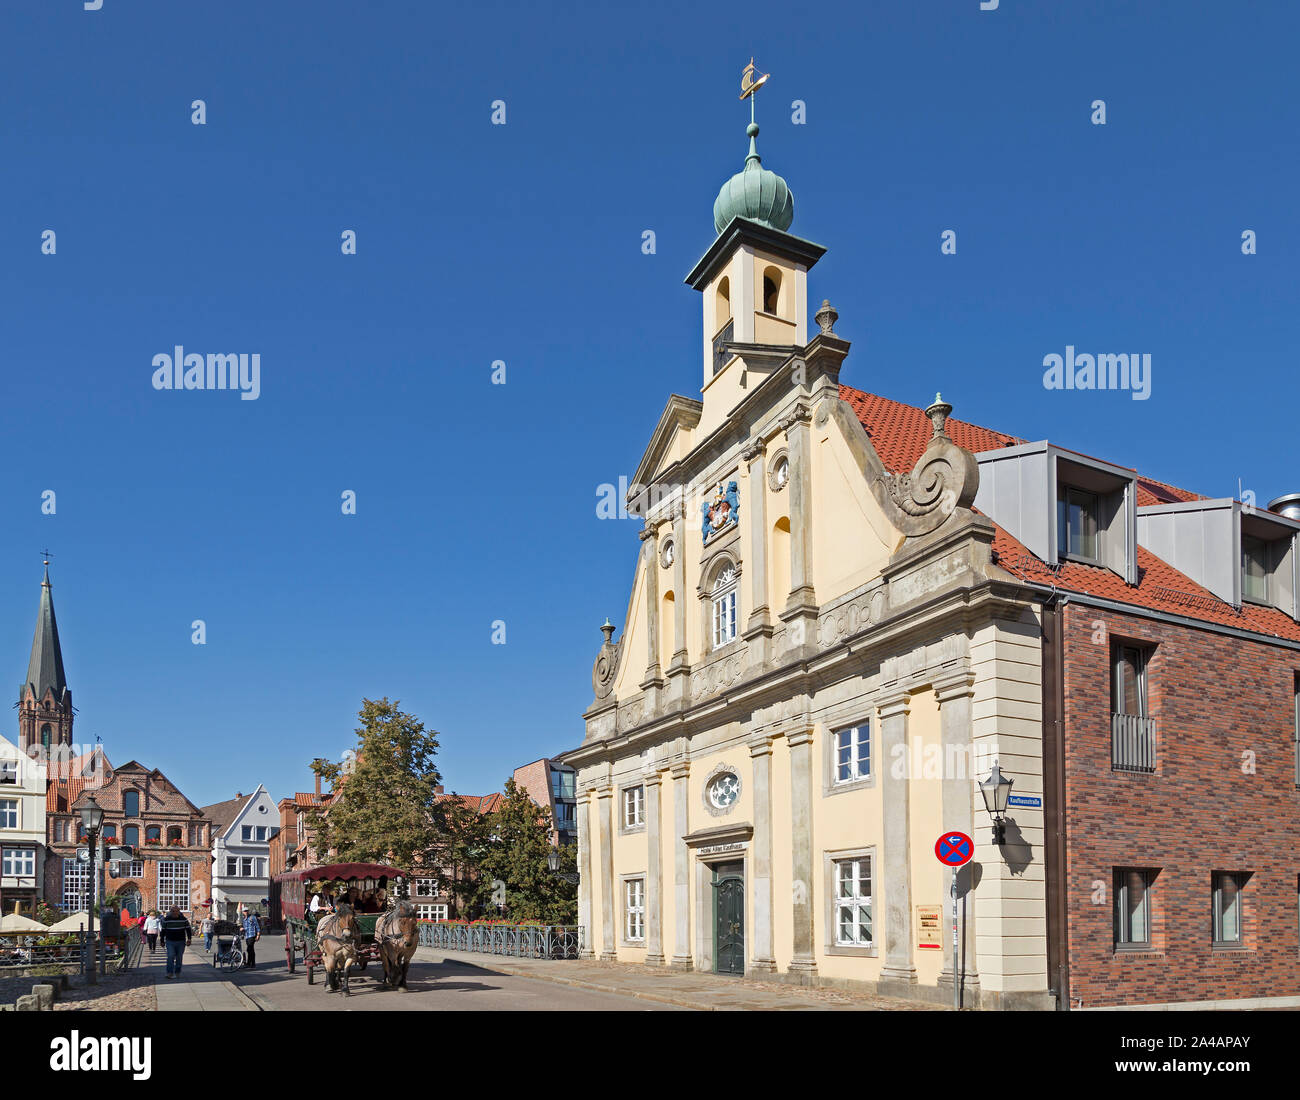 horse-drawn carriage, Hotel Altes Kaufhaus, old town, Lueneburg, Lower Saxony, Germany Stock Photo